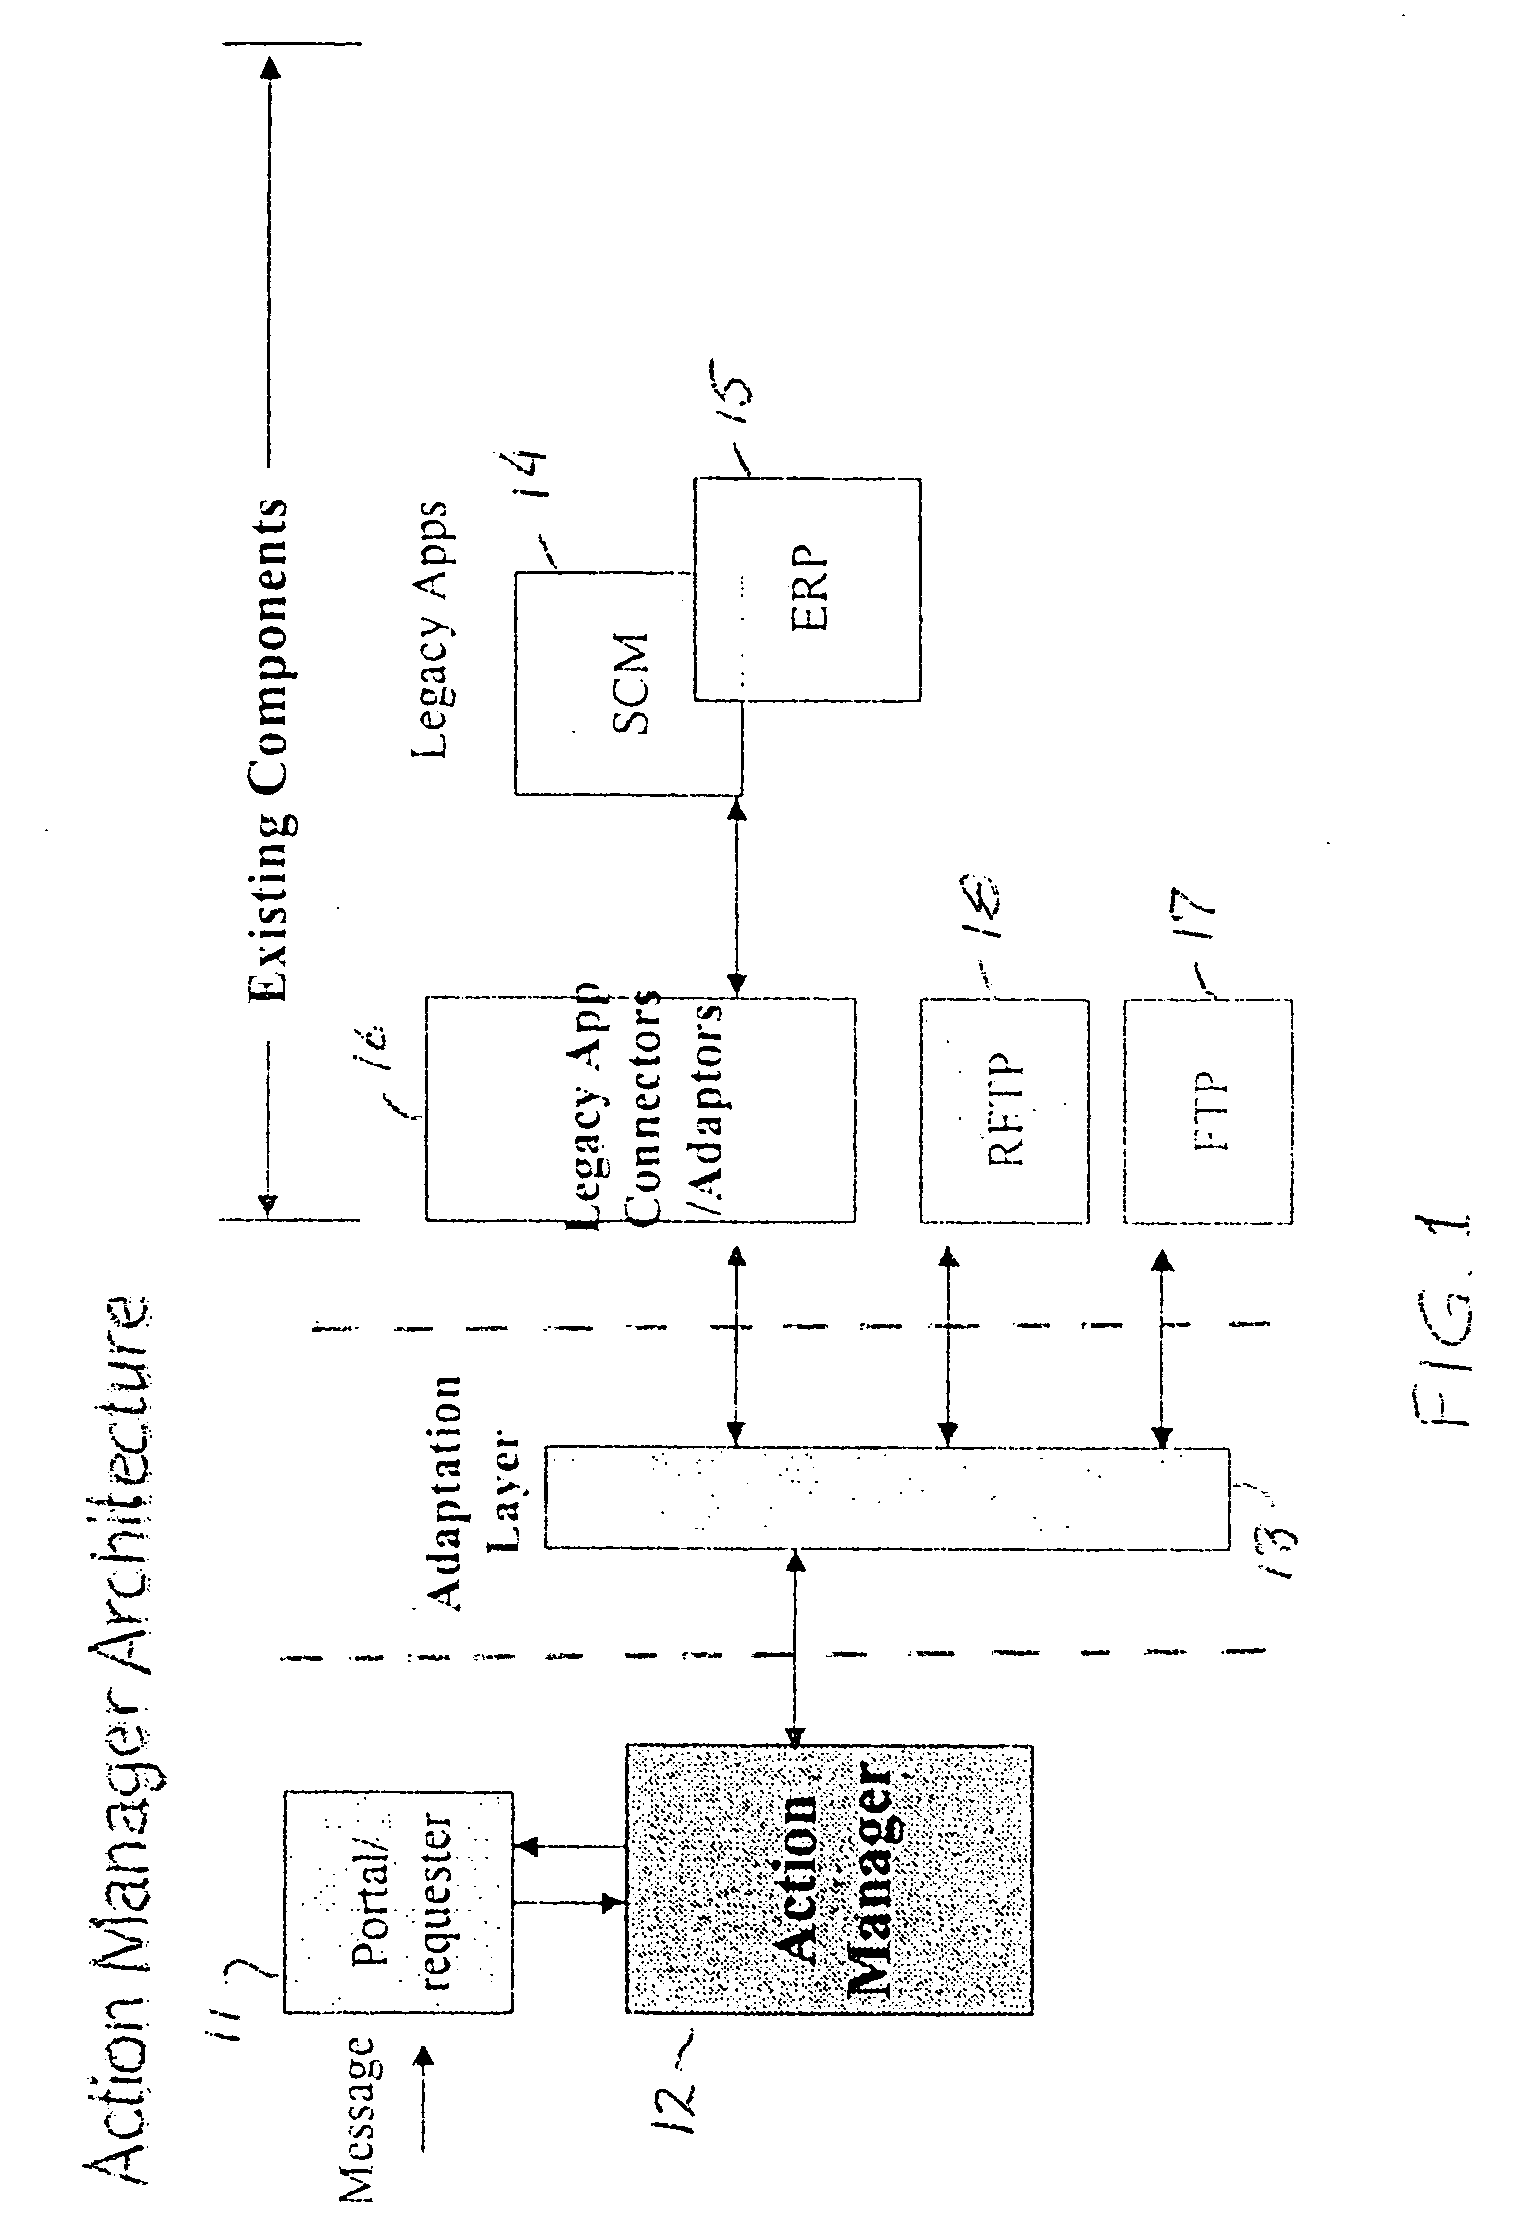 Method and apparatus of adaptive integration activity management for business application integration